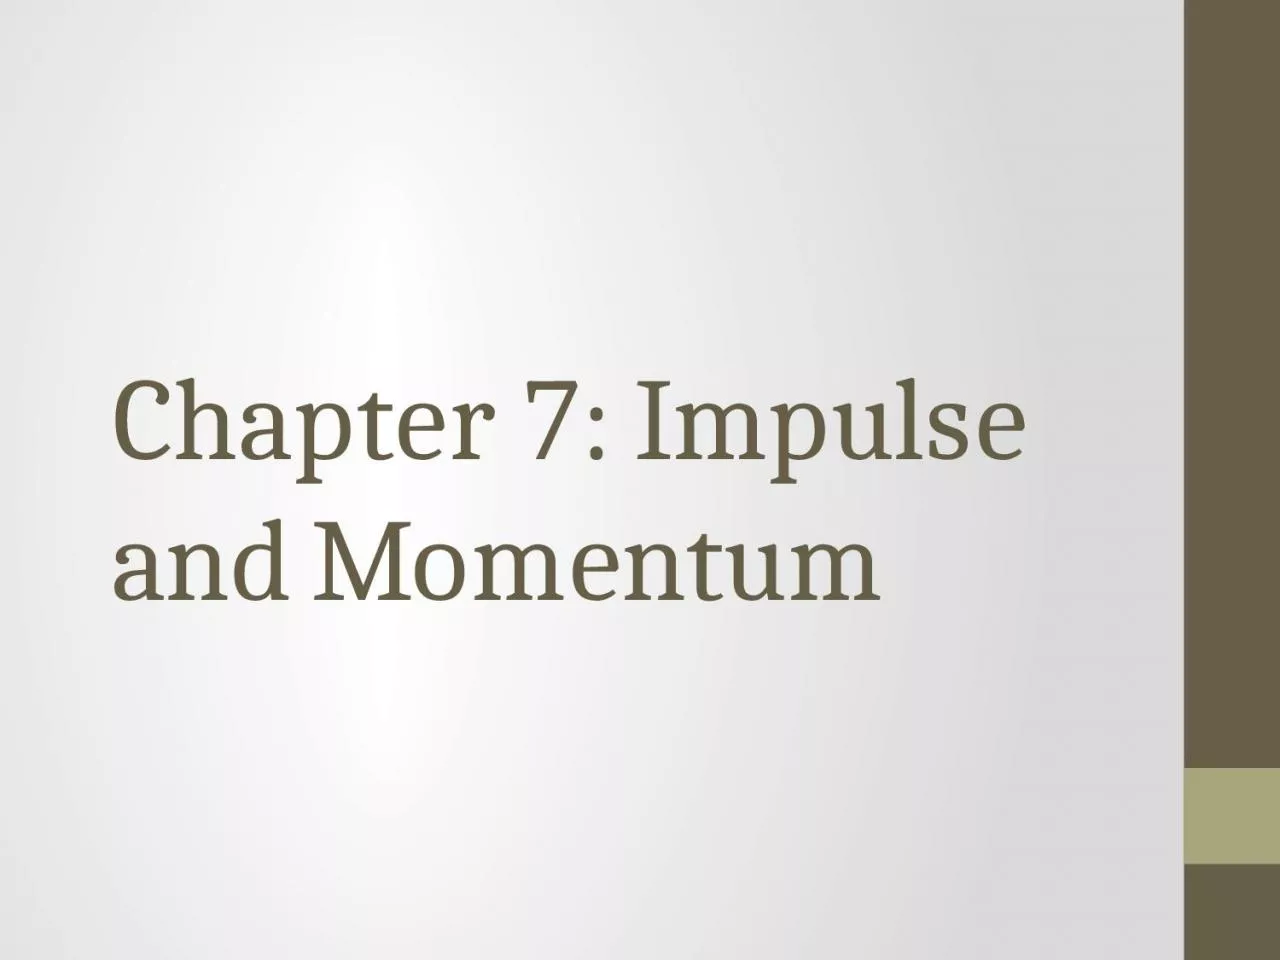 Chapter 7: Impulse and Momentum